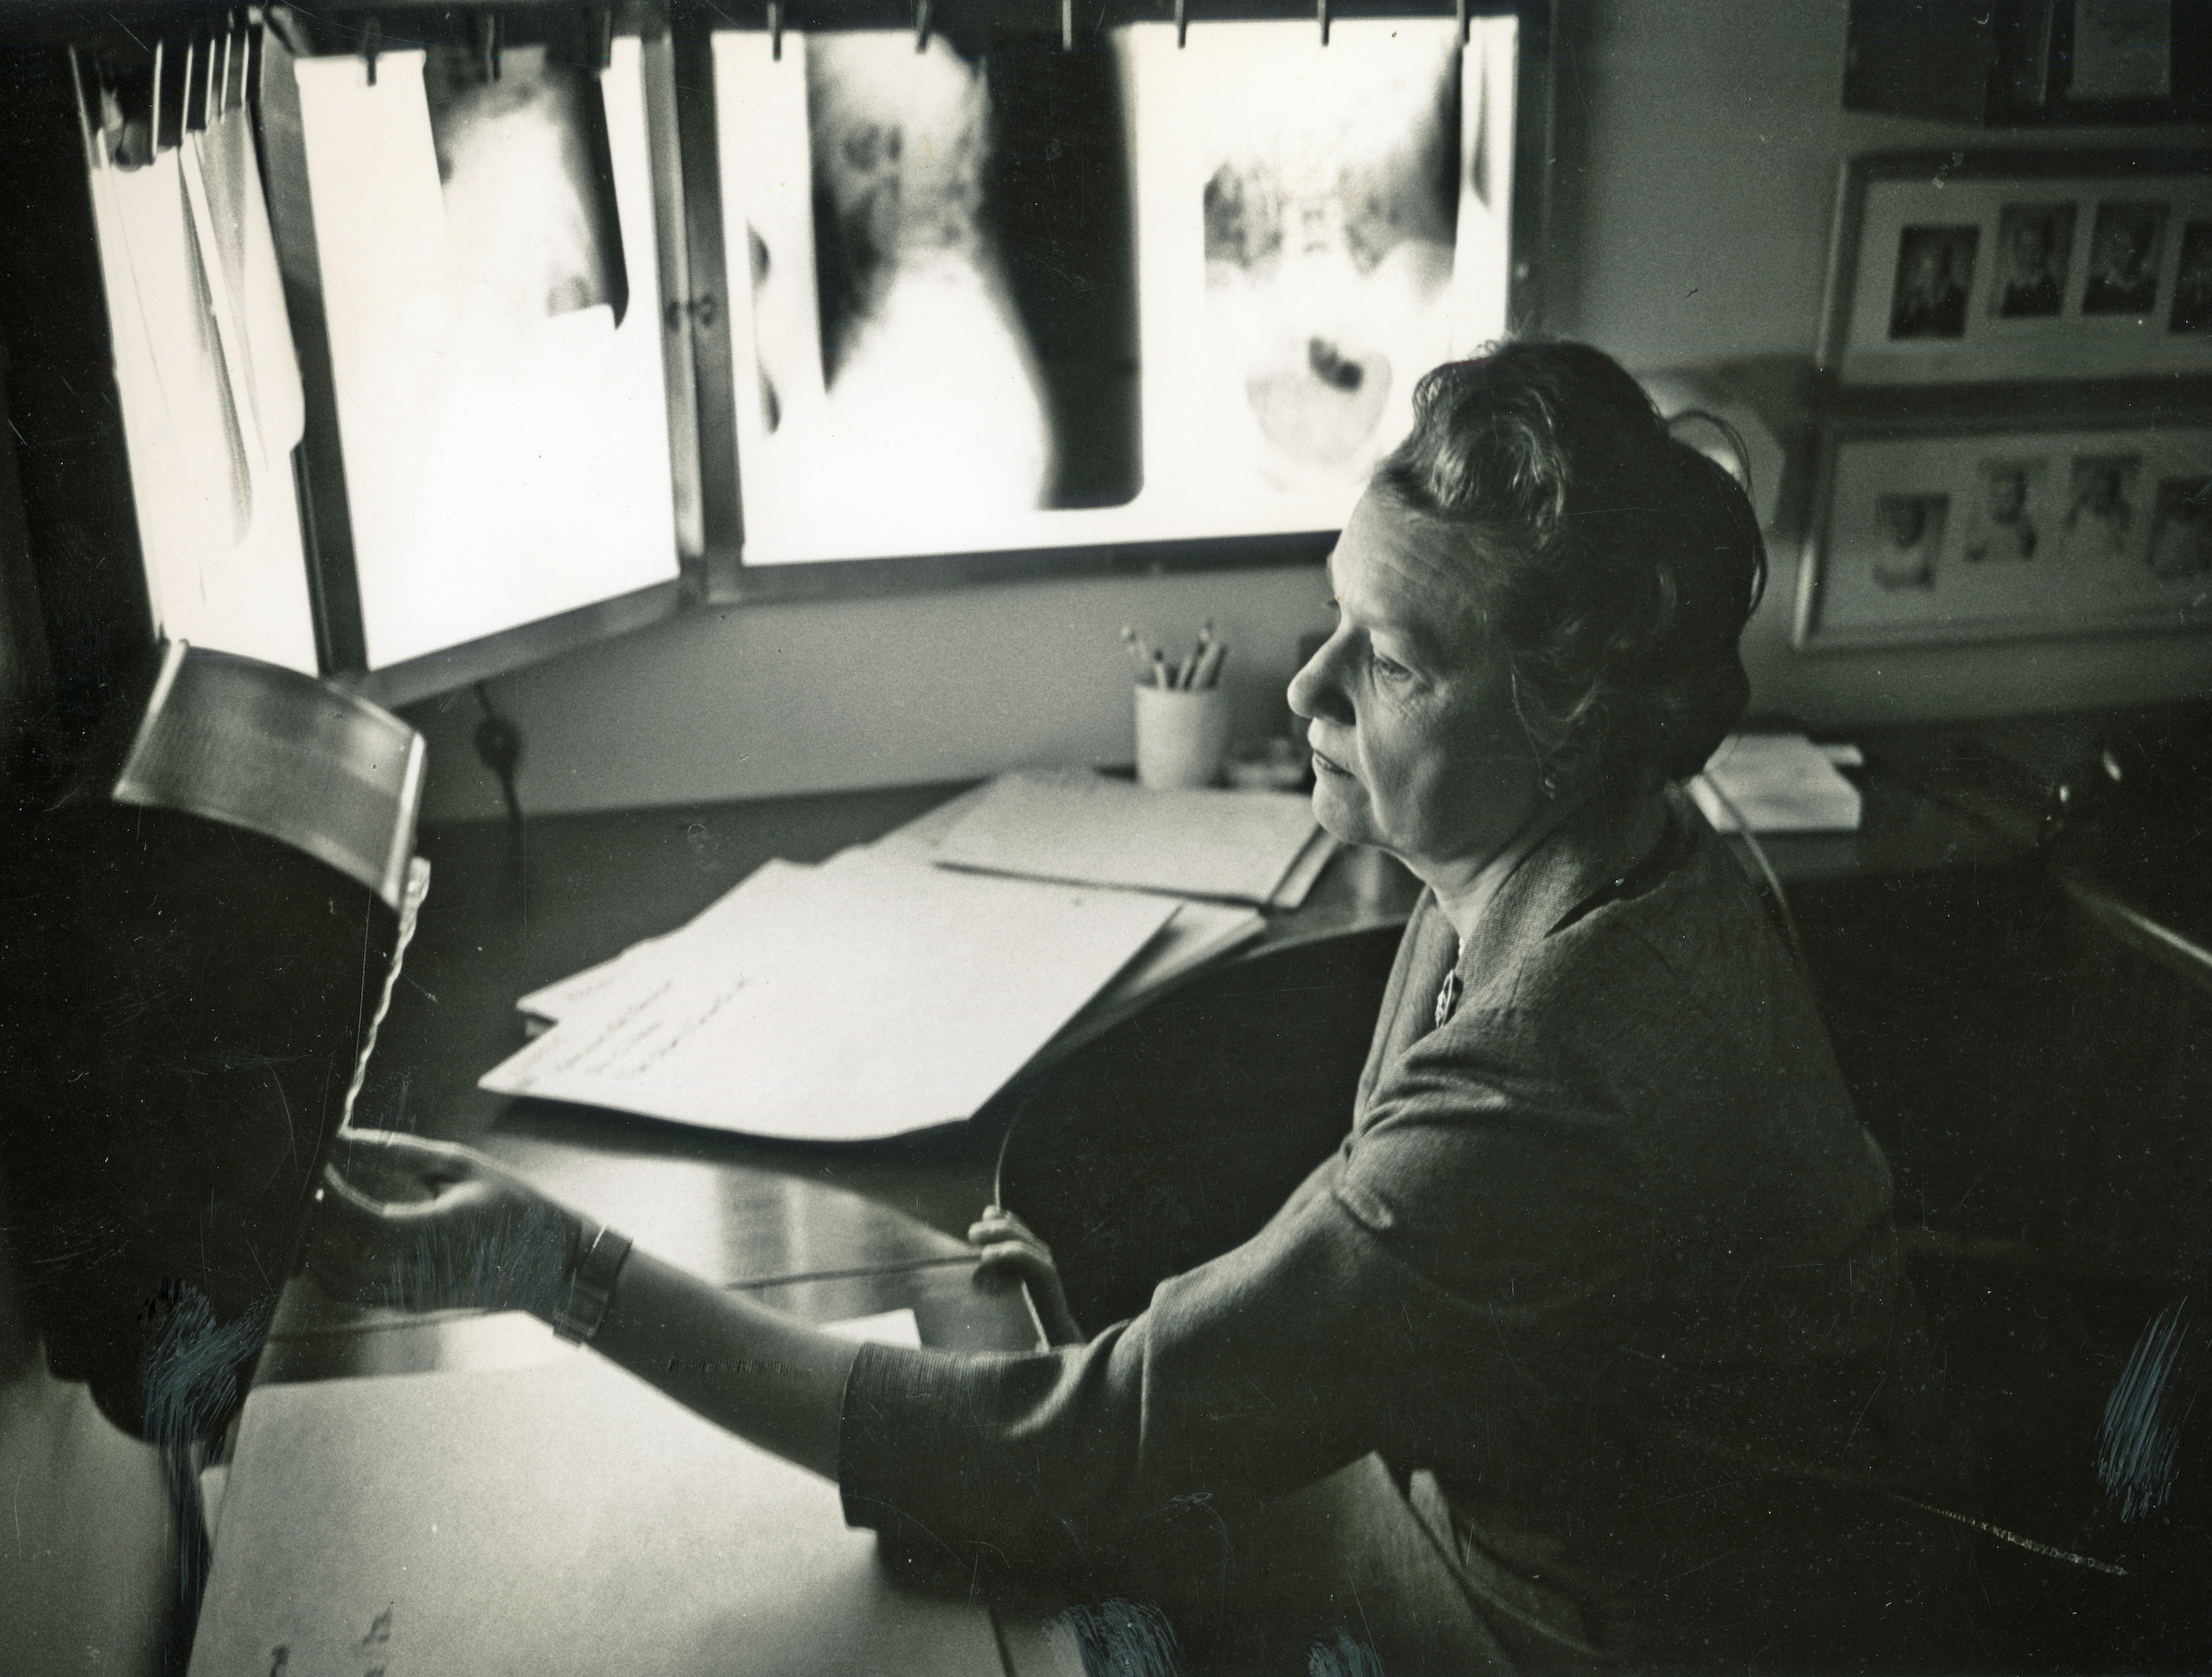 A black and white photo of a woman reviewing X-rays.